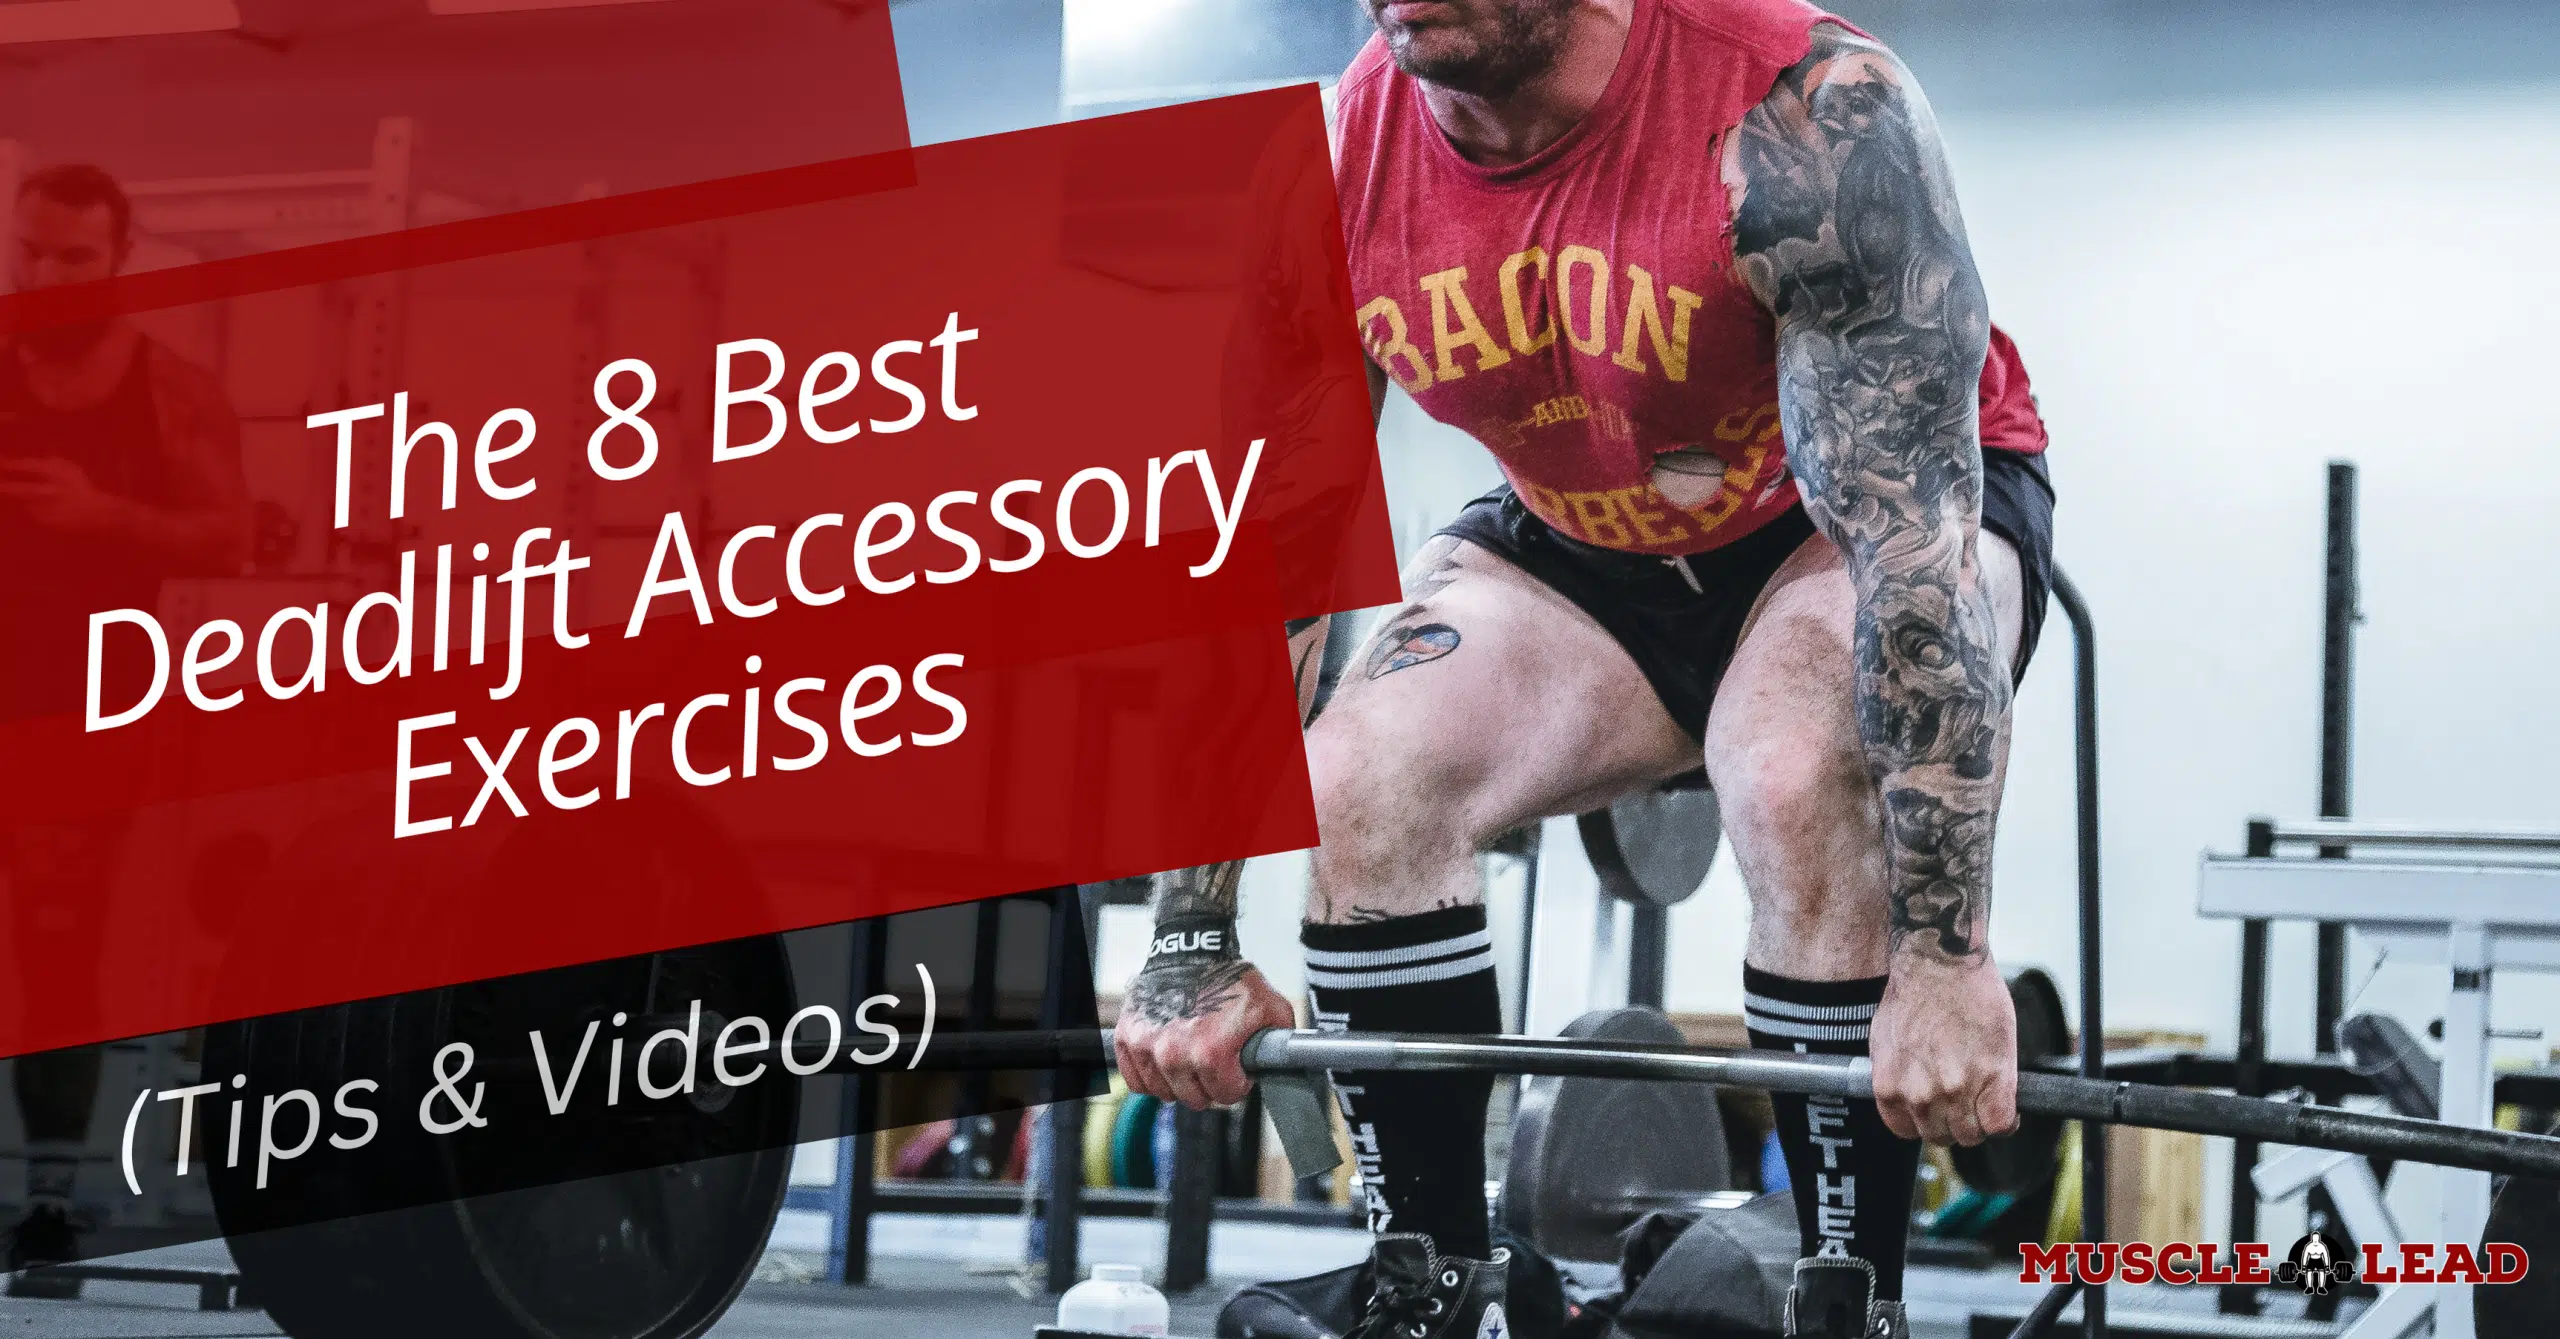 The 8 Best Deadlift Accessory Exercises (Tips & Videos)